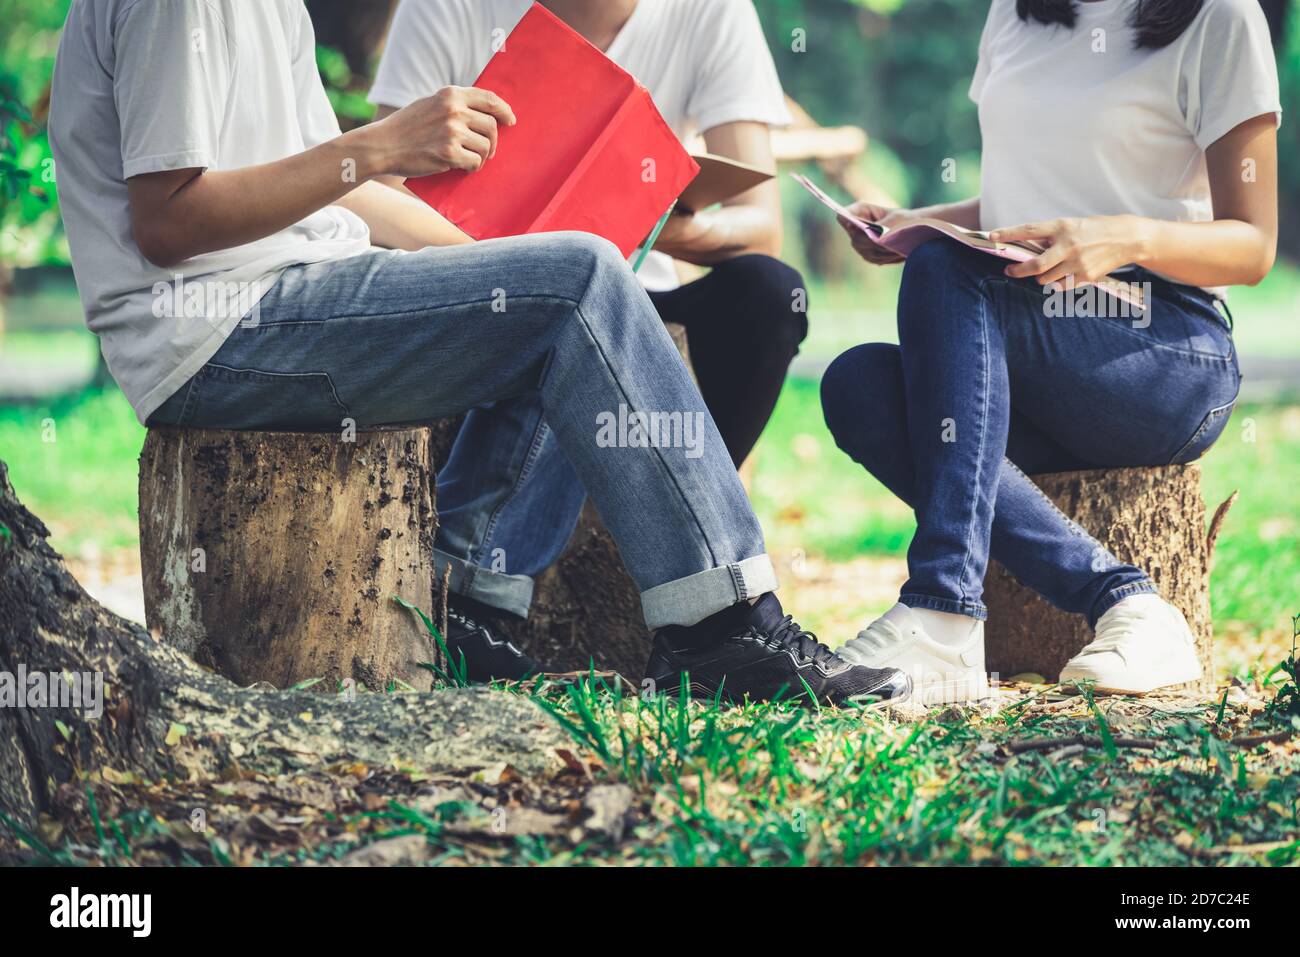 Team of young students studying in a group project in the park of university or school. Happy learning, community teamwork and youth friendship Stock Photo